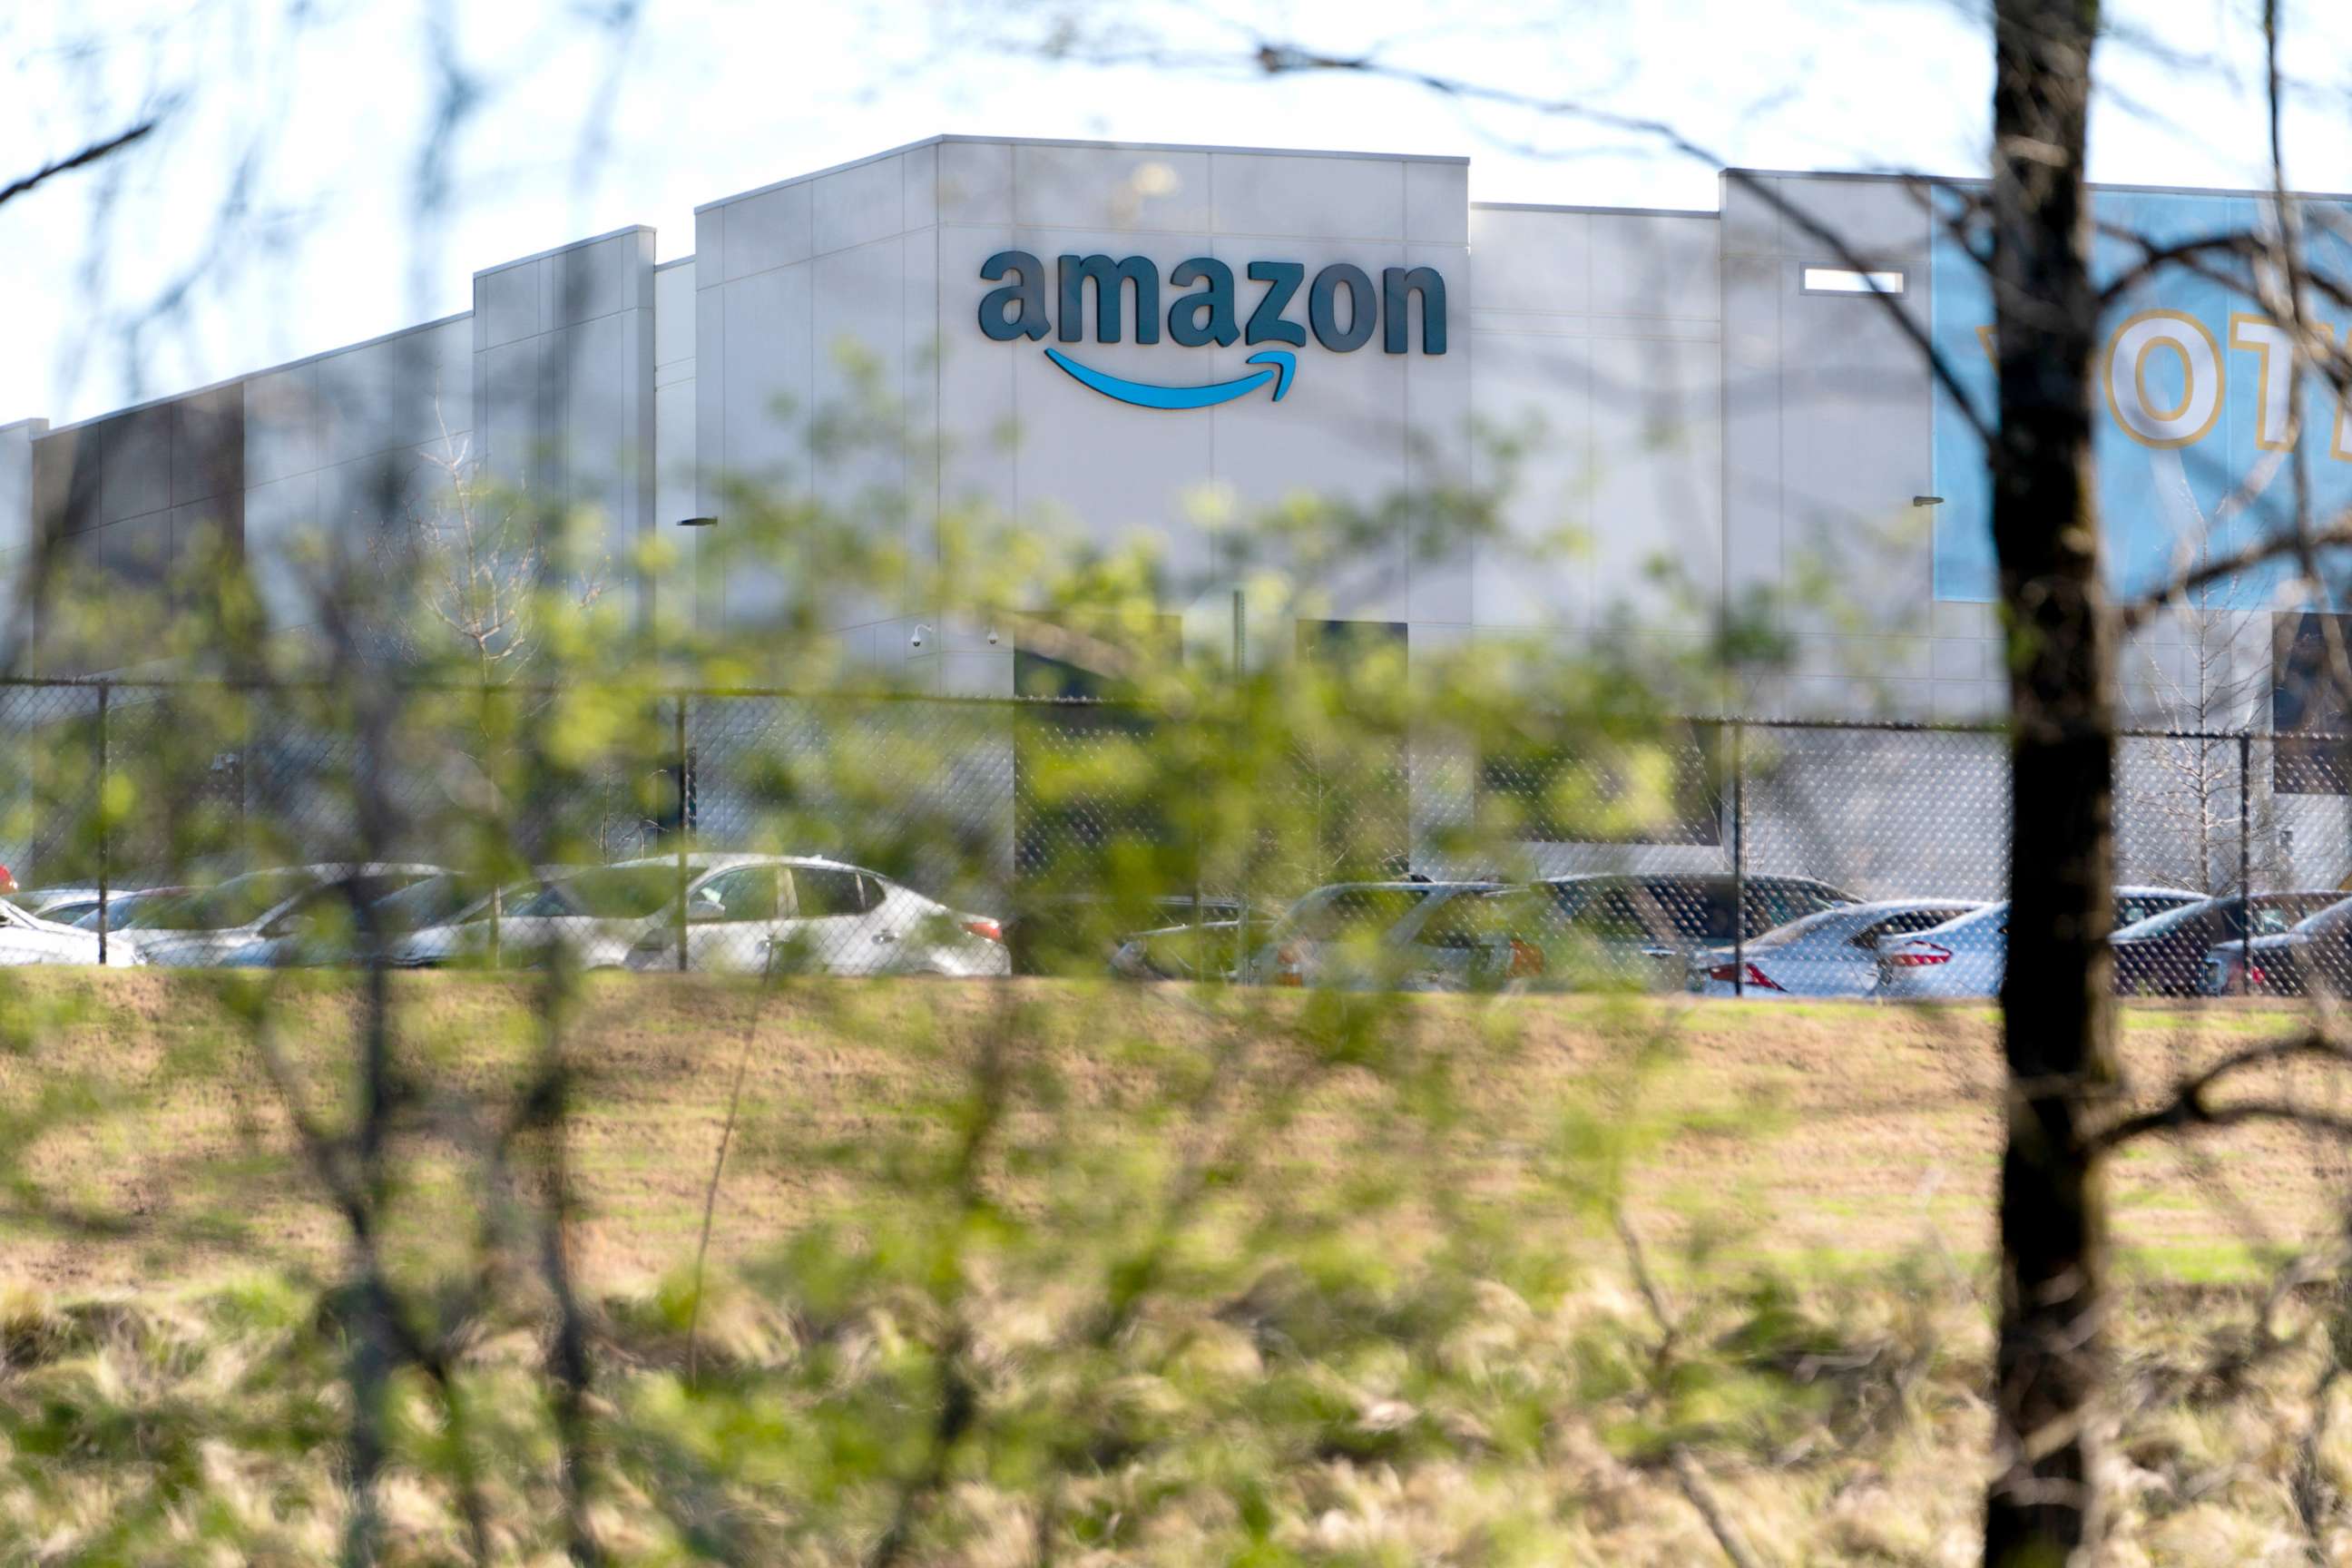 PHOTO: The Amazon fulfillment warehouse in Bessemer, Ala. is pictured in this March 29, 2021 image.